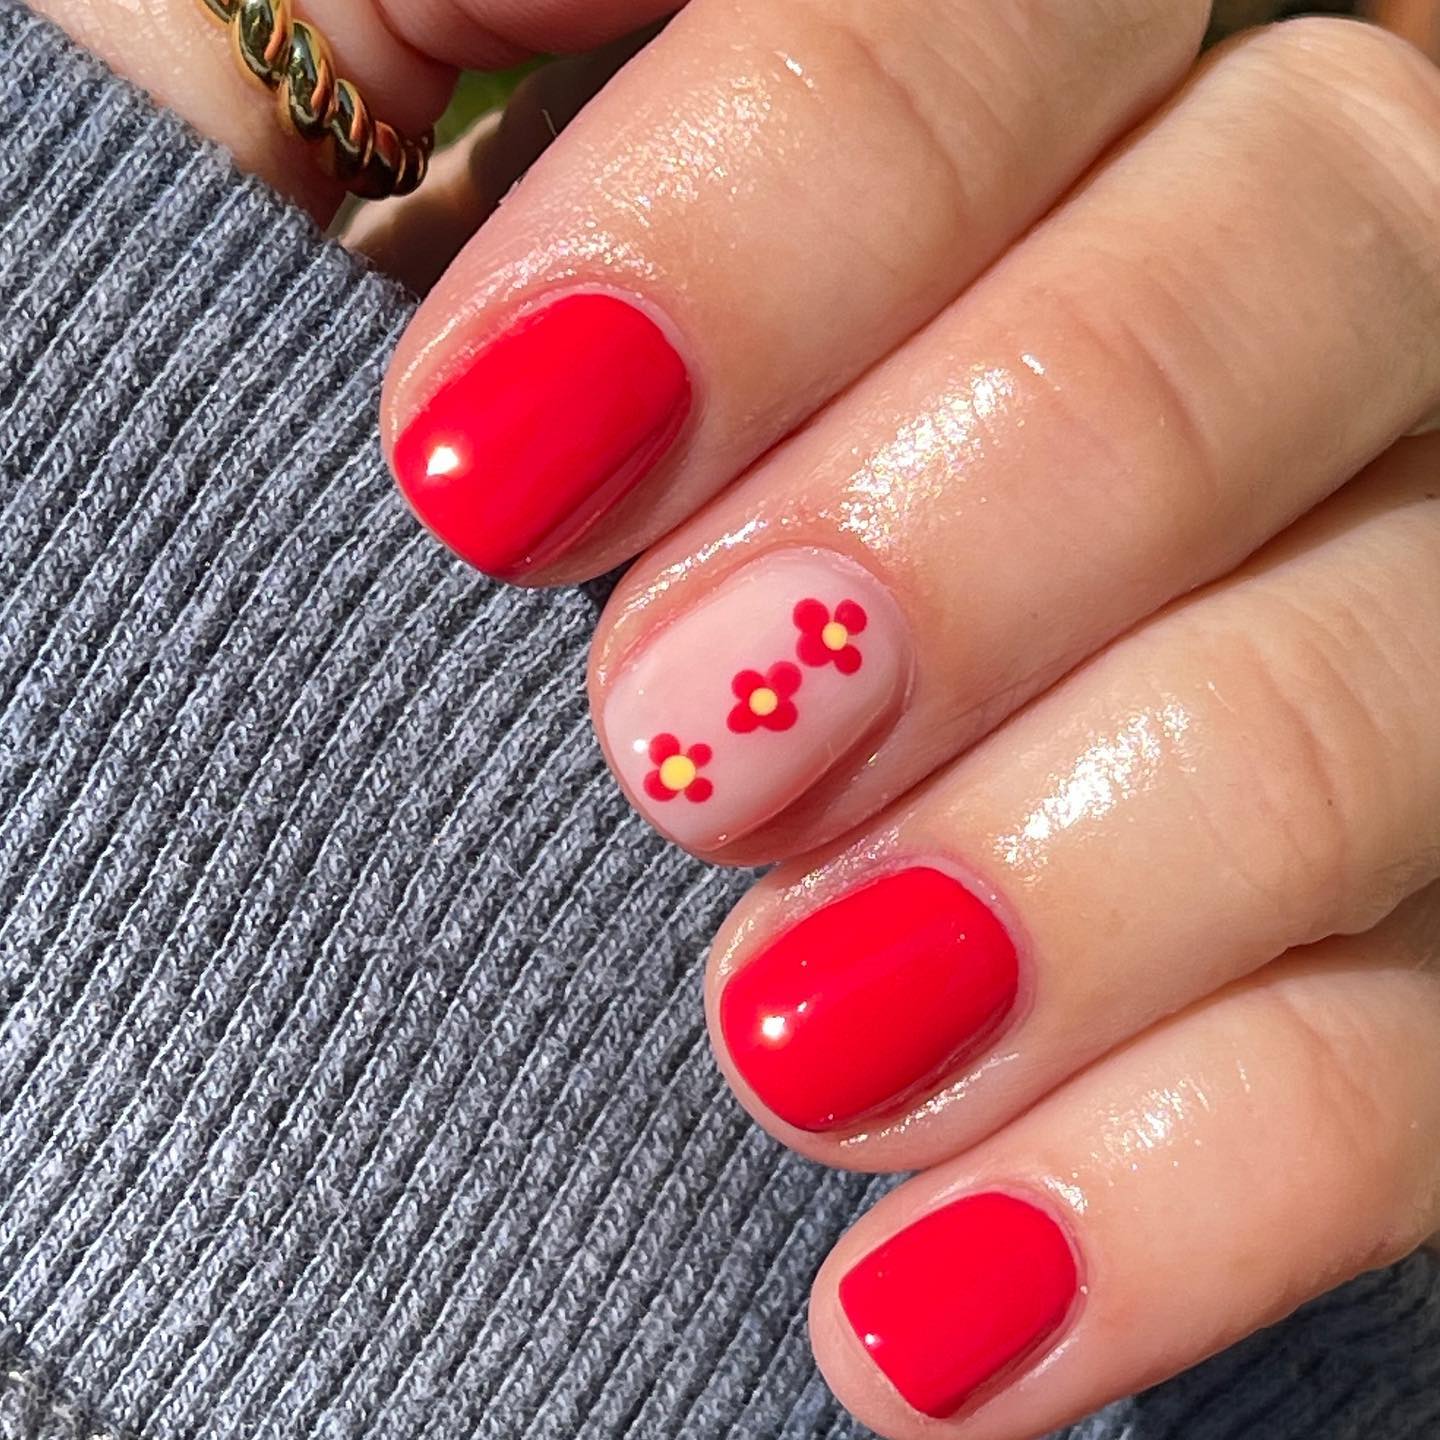 Short Red Nails with Floral Design